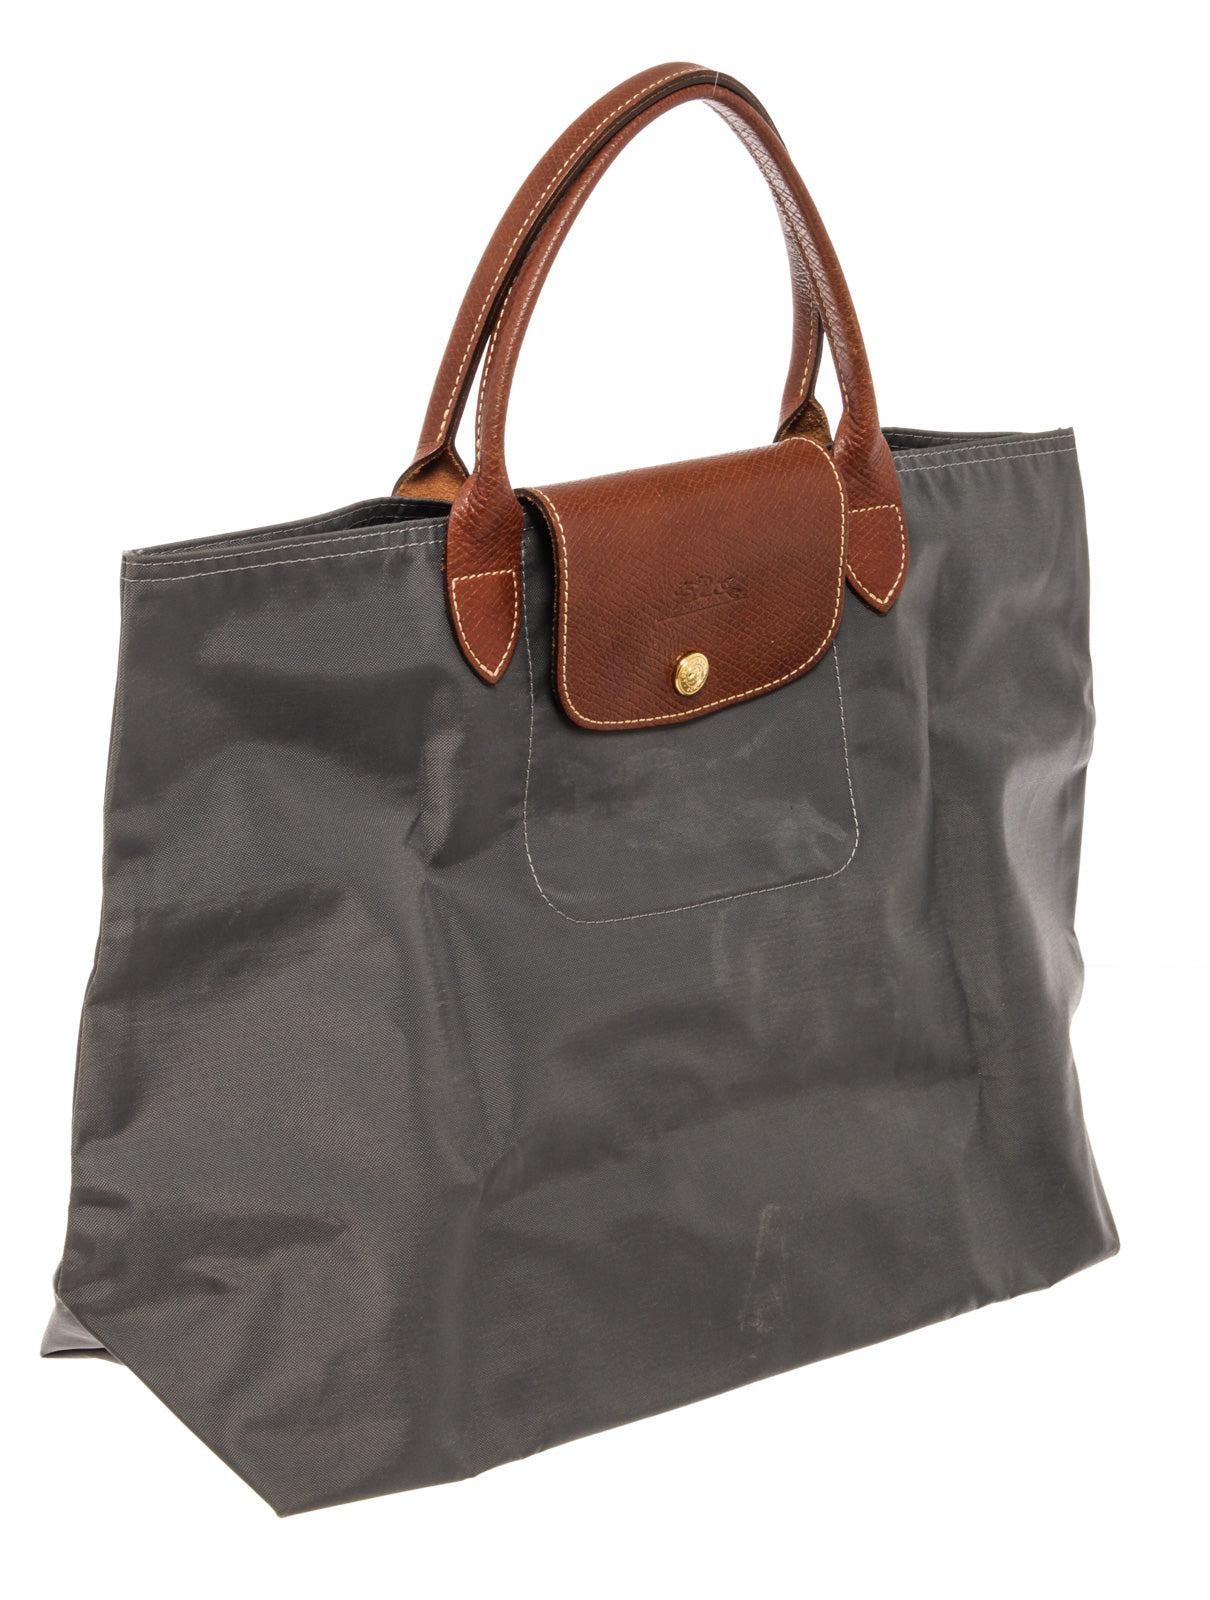 Longchamp Grey Nylon Le Pliage Medium no zipper tote bag with gold-tone hardware, fabric interior lining, one slip pocket at interior wall and double brown leather top handles.
 

46398MSC

 17